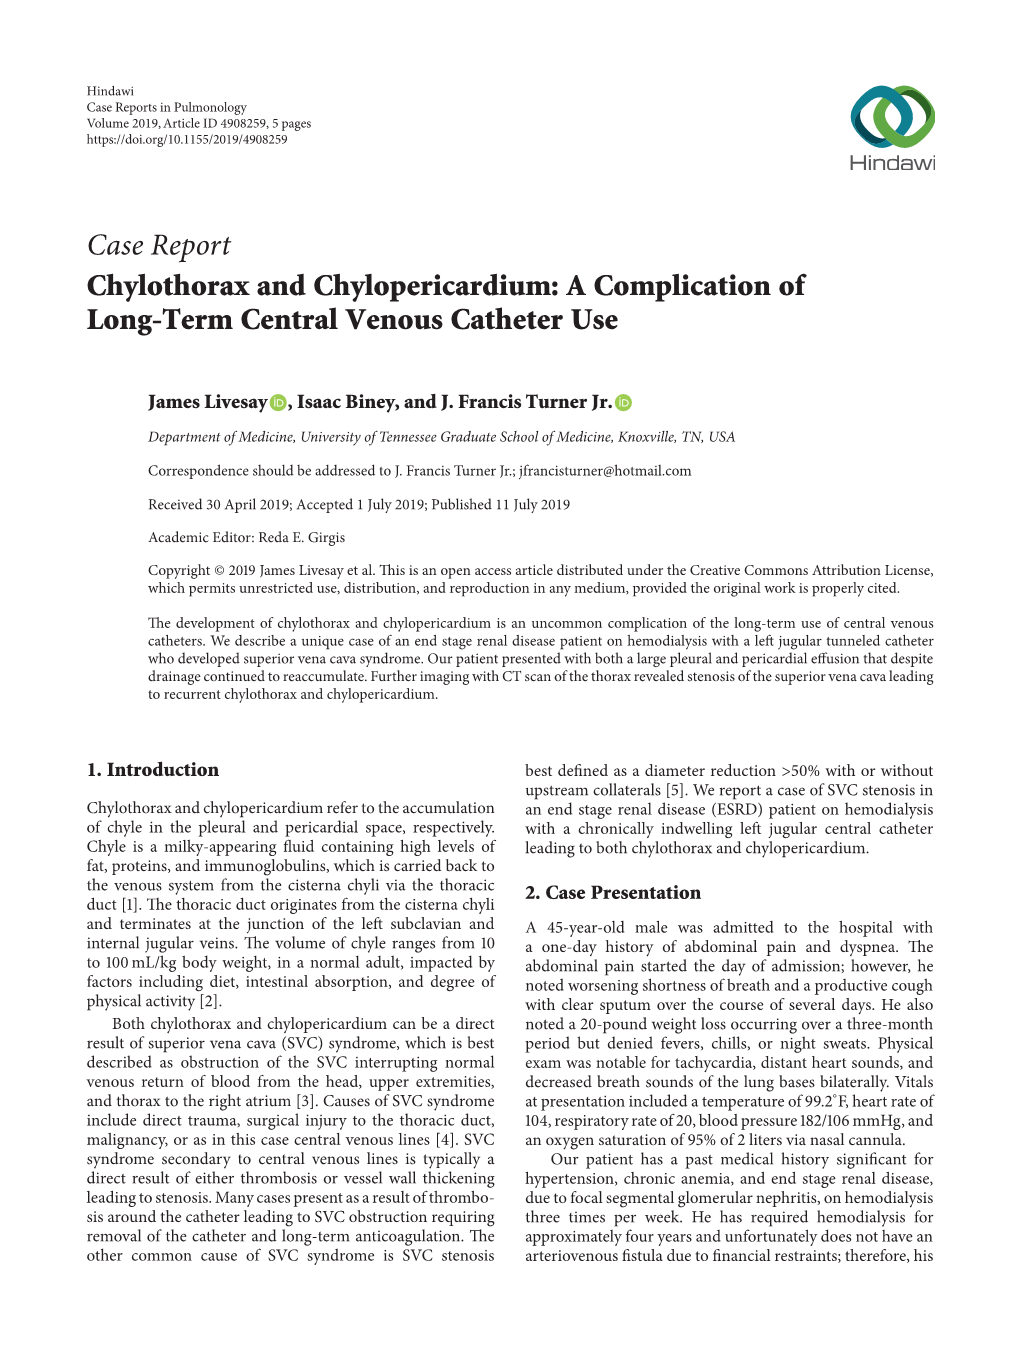 Chylothorax and Chylopericardium: a Complication of Long-Term Central Venous Catheter Use